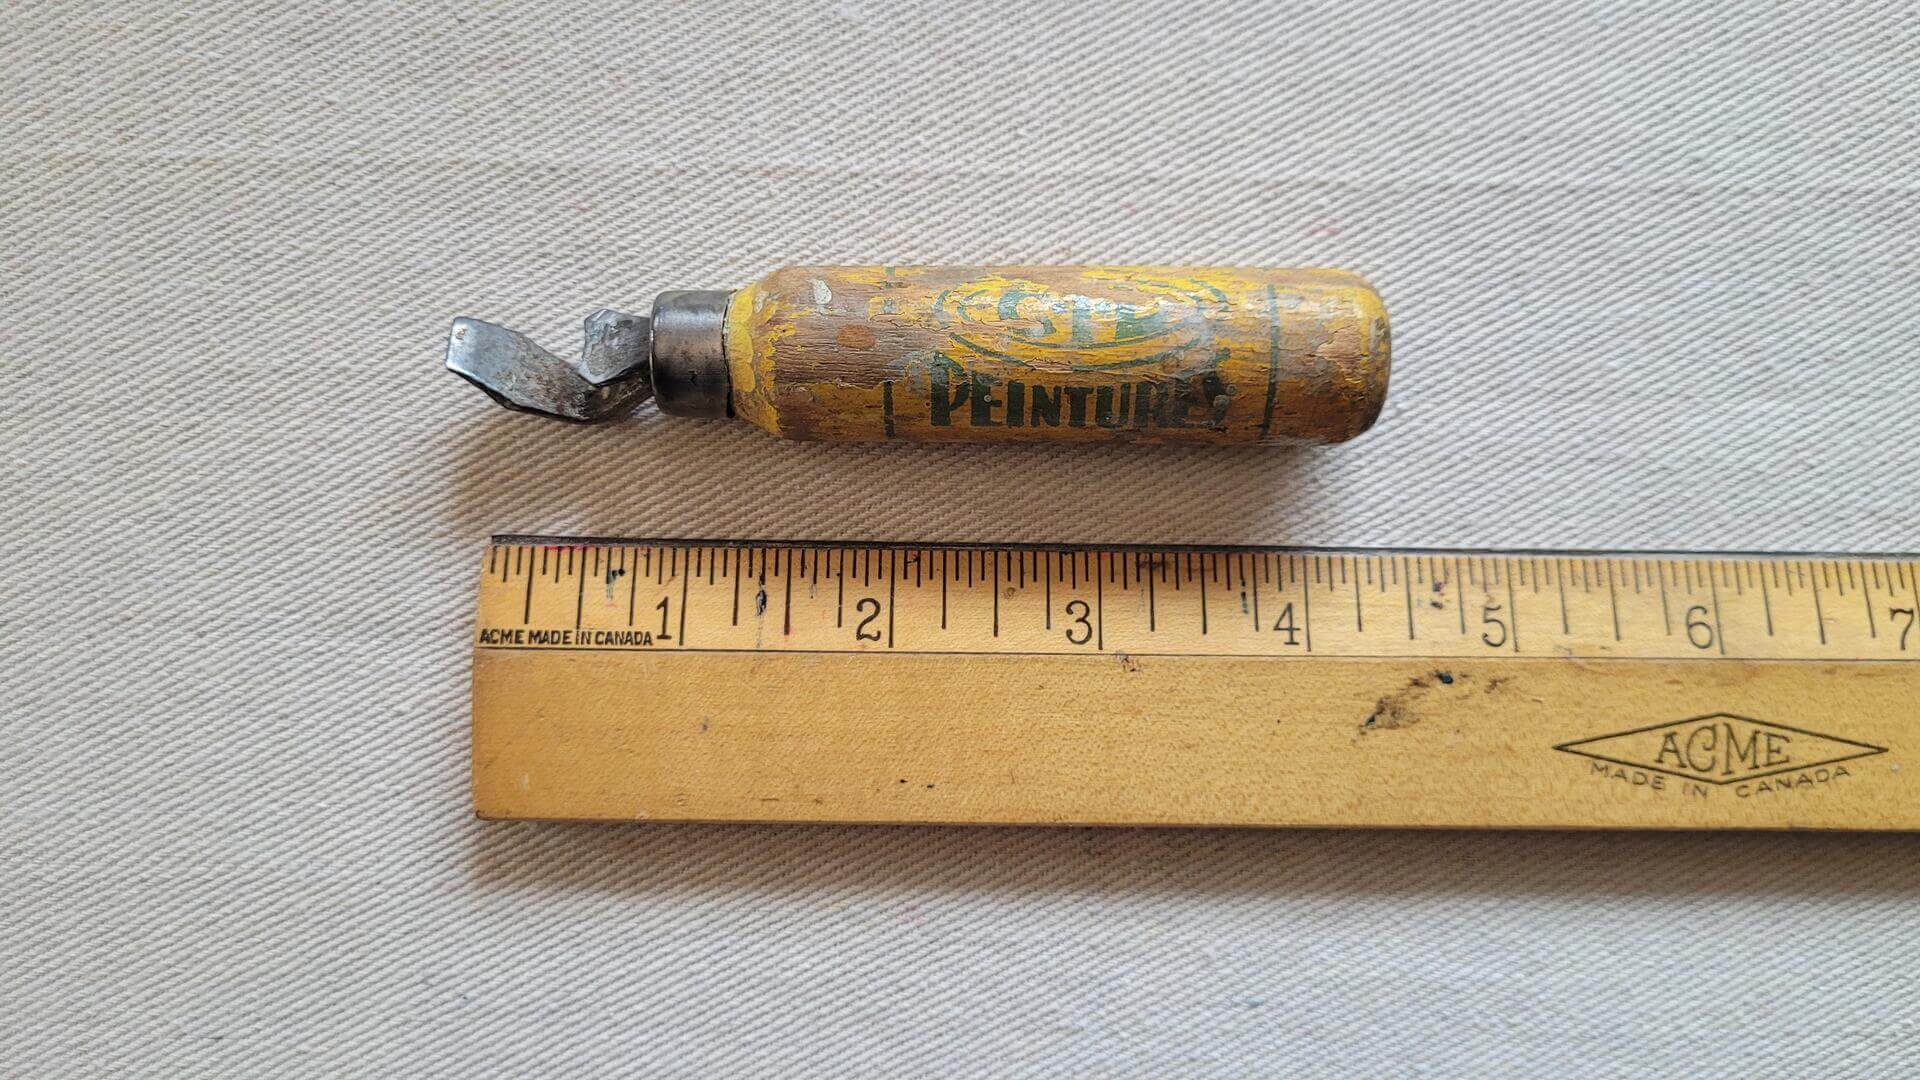 Rare antique CIL Peintures paint can opener personalized for Lacroix Ferronnerie hardware store from Lachine, a borough within the city of Montreal. Vintage made in Canada collectible artist and painter tools